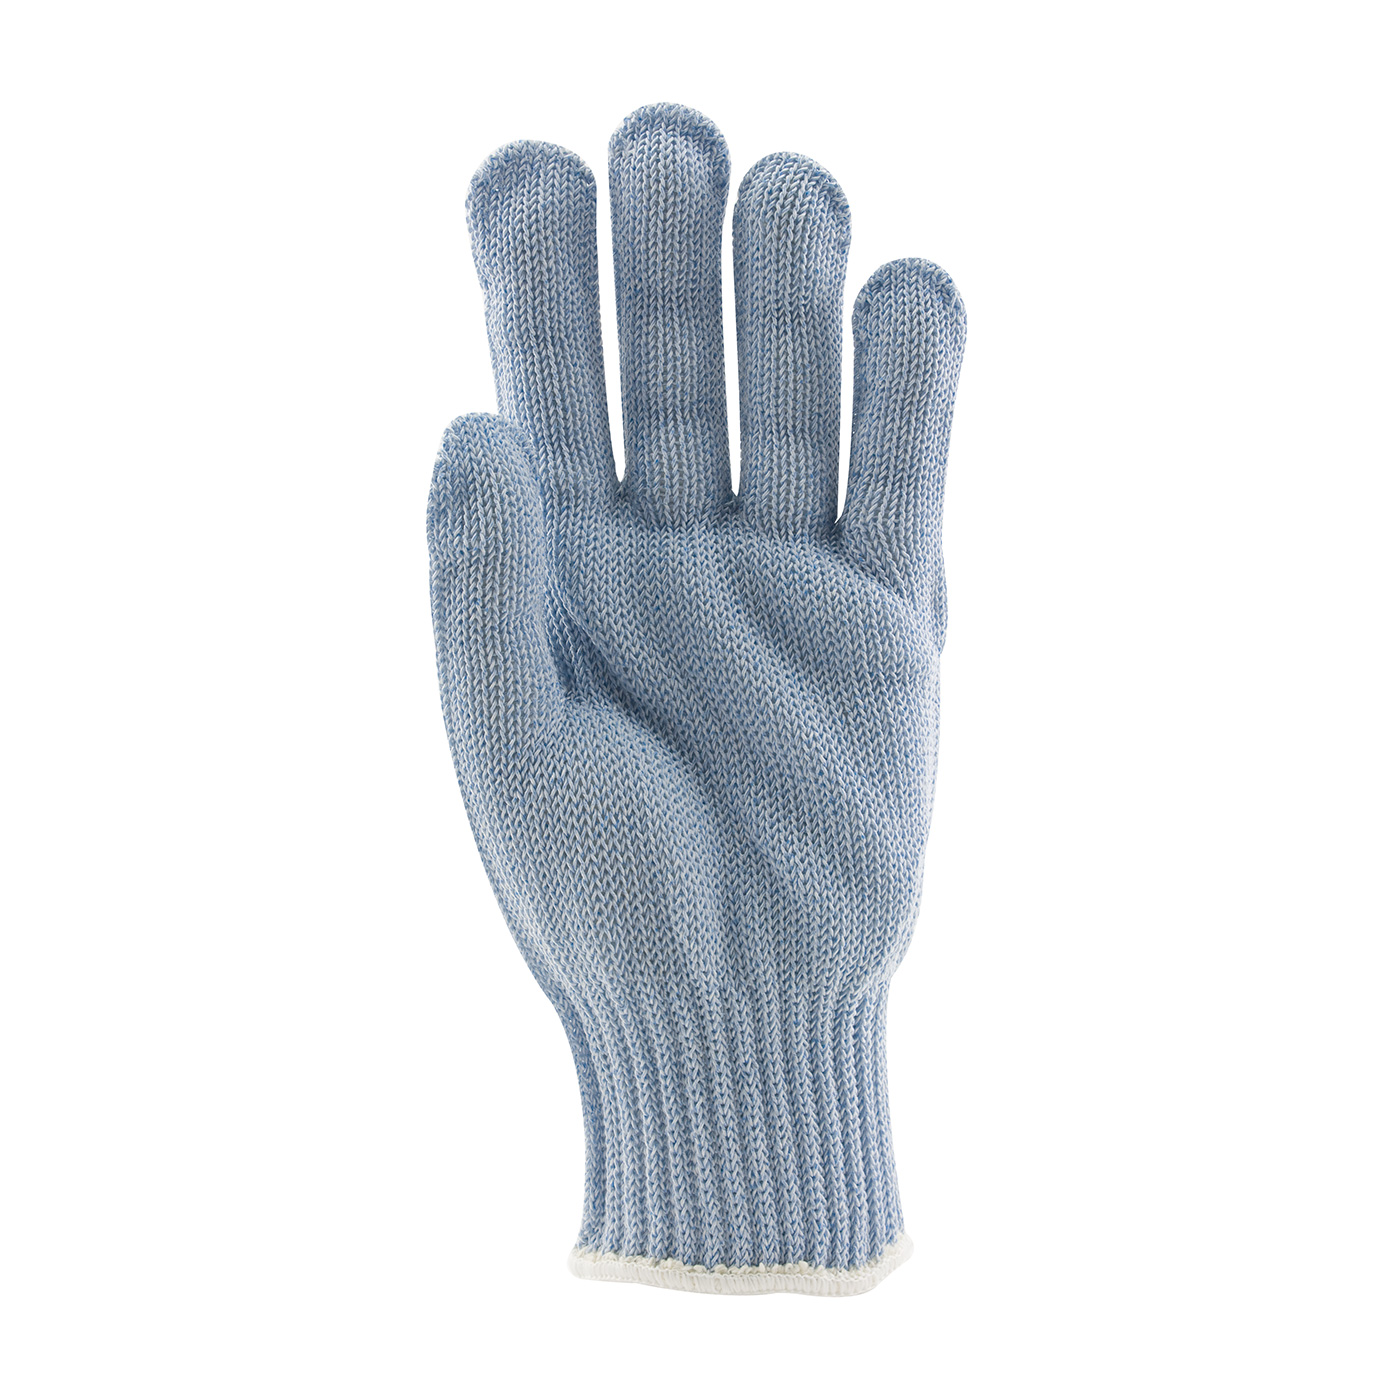 22-600 PIP® Claw Cover® Seamless Knit Blue PolyKor® Blended Glove - Heavy Weight